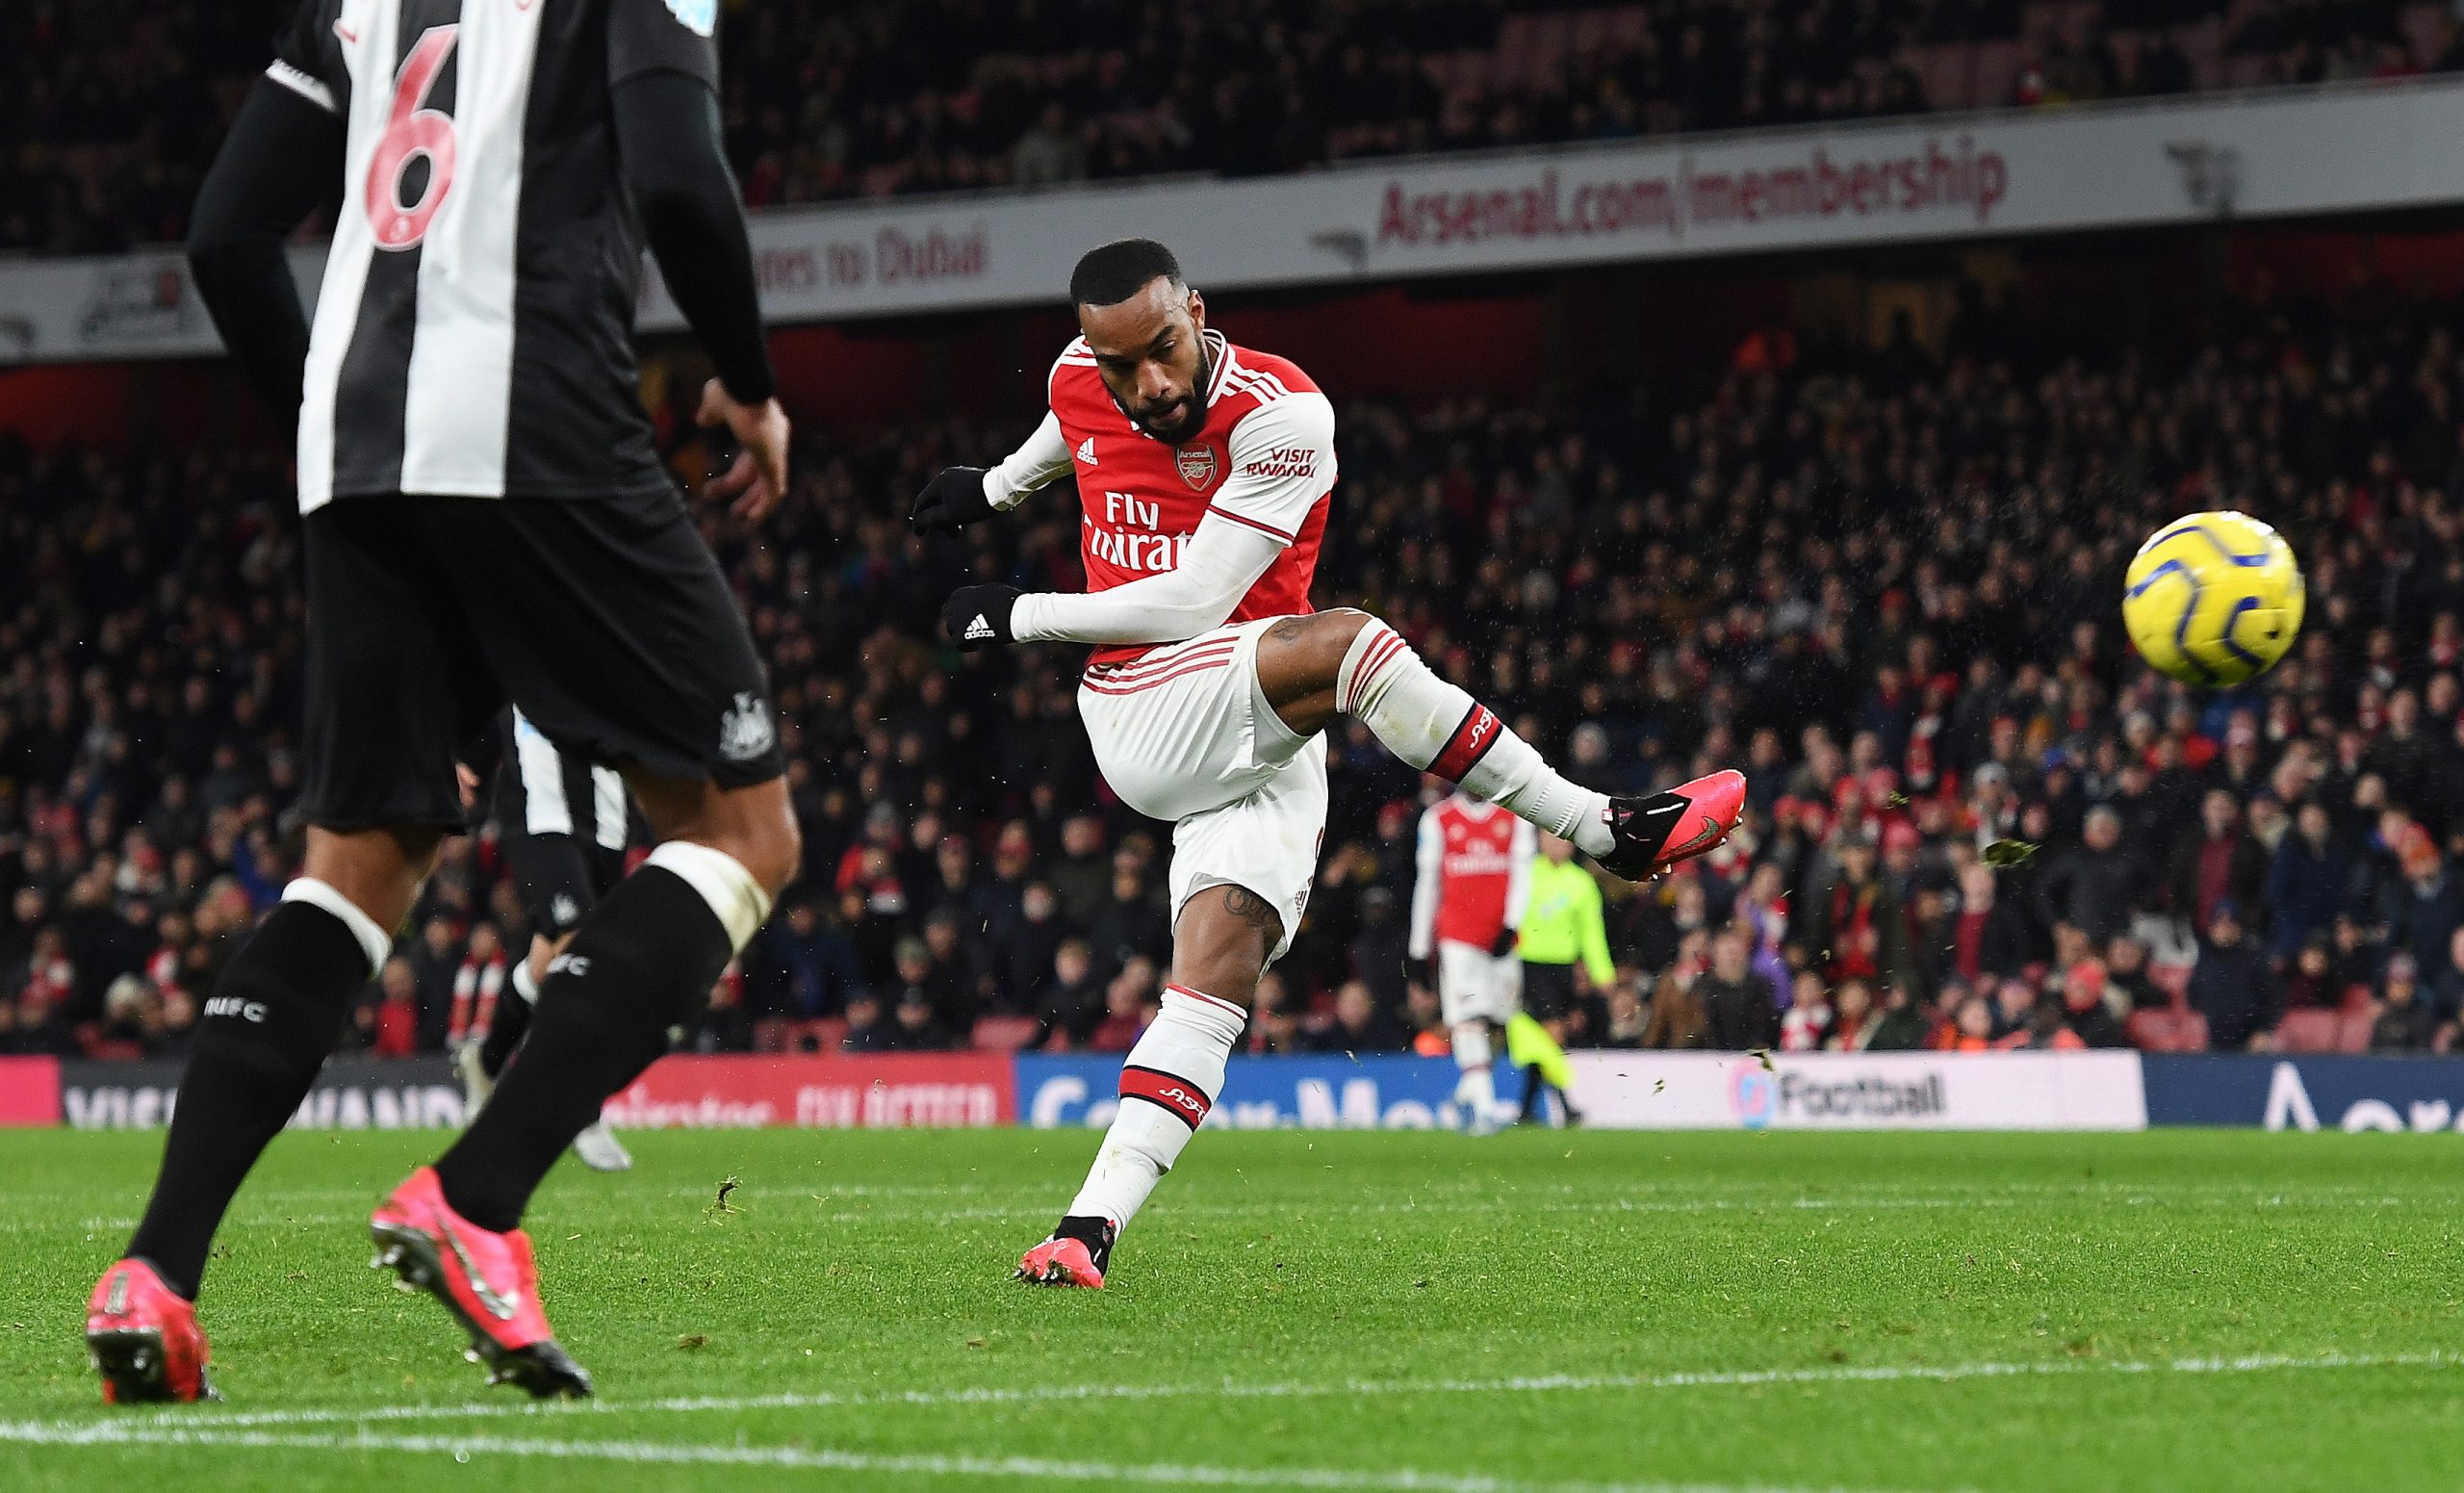 epa08222624 Arsenal's Alexandre Lacazette scores Arsenal's fourth goal of the match against  Newcastle United during an English Premier League soccer match at the Emirates Stadium in London, Britain, 16 February 2020.  EPA/ANDY RAIN EDITORIAL USE ONLY. No use with unauthorized audio, video, data, fixture lists, club/league logos or 'live' services. Online in-match use limited to 120 images, no video emulation. No use in betting, games or single club/league/player publications